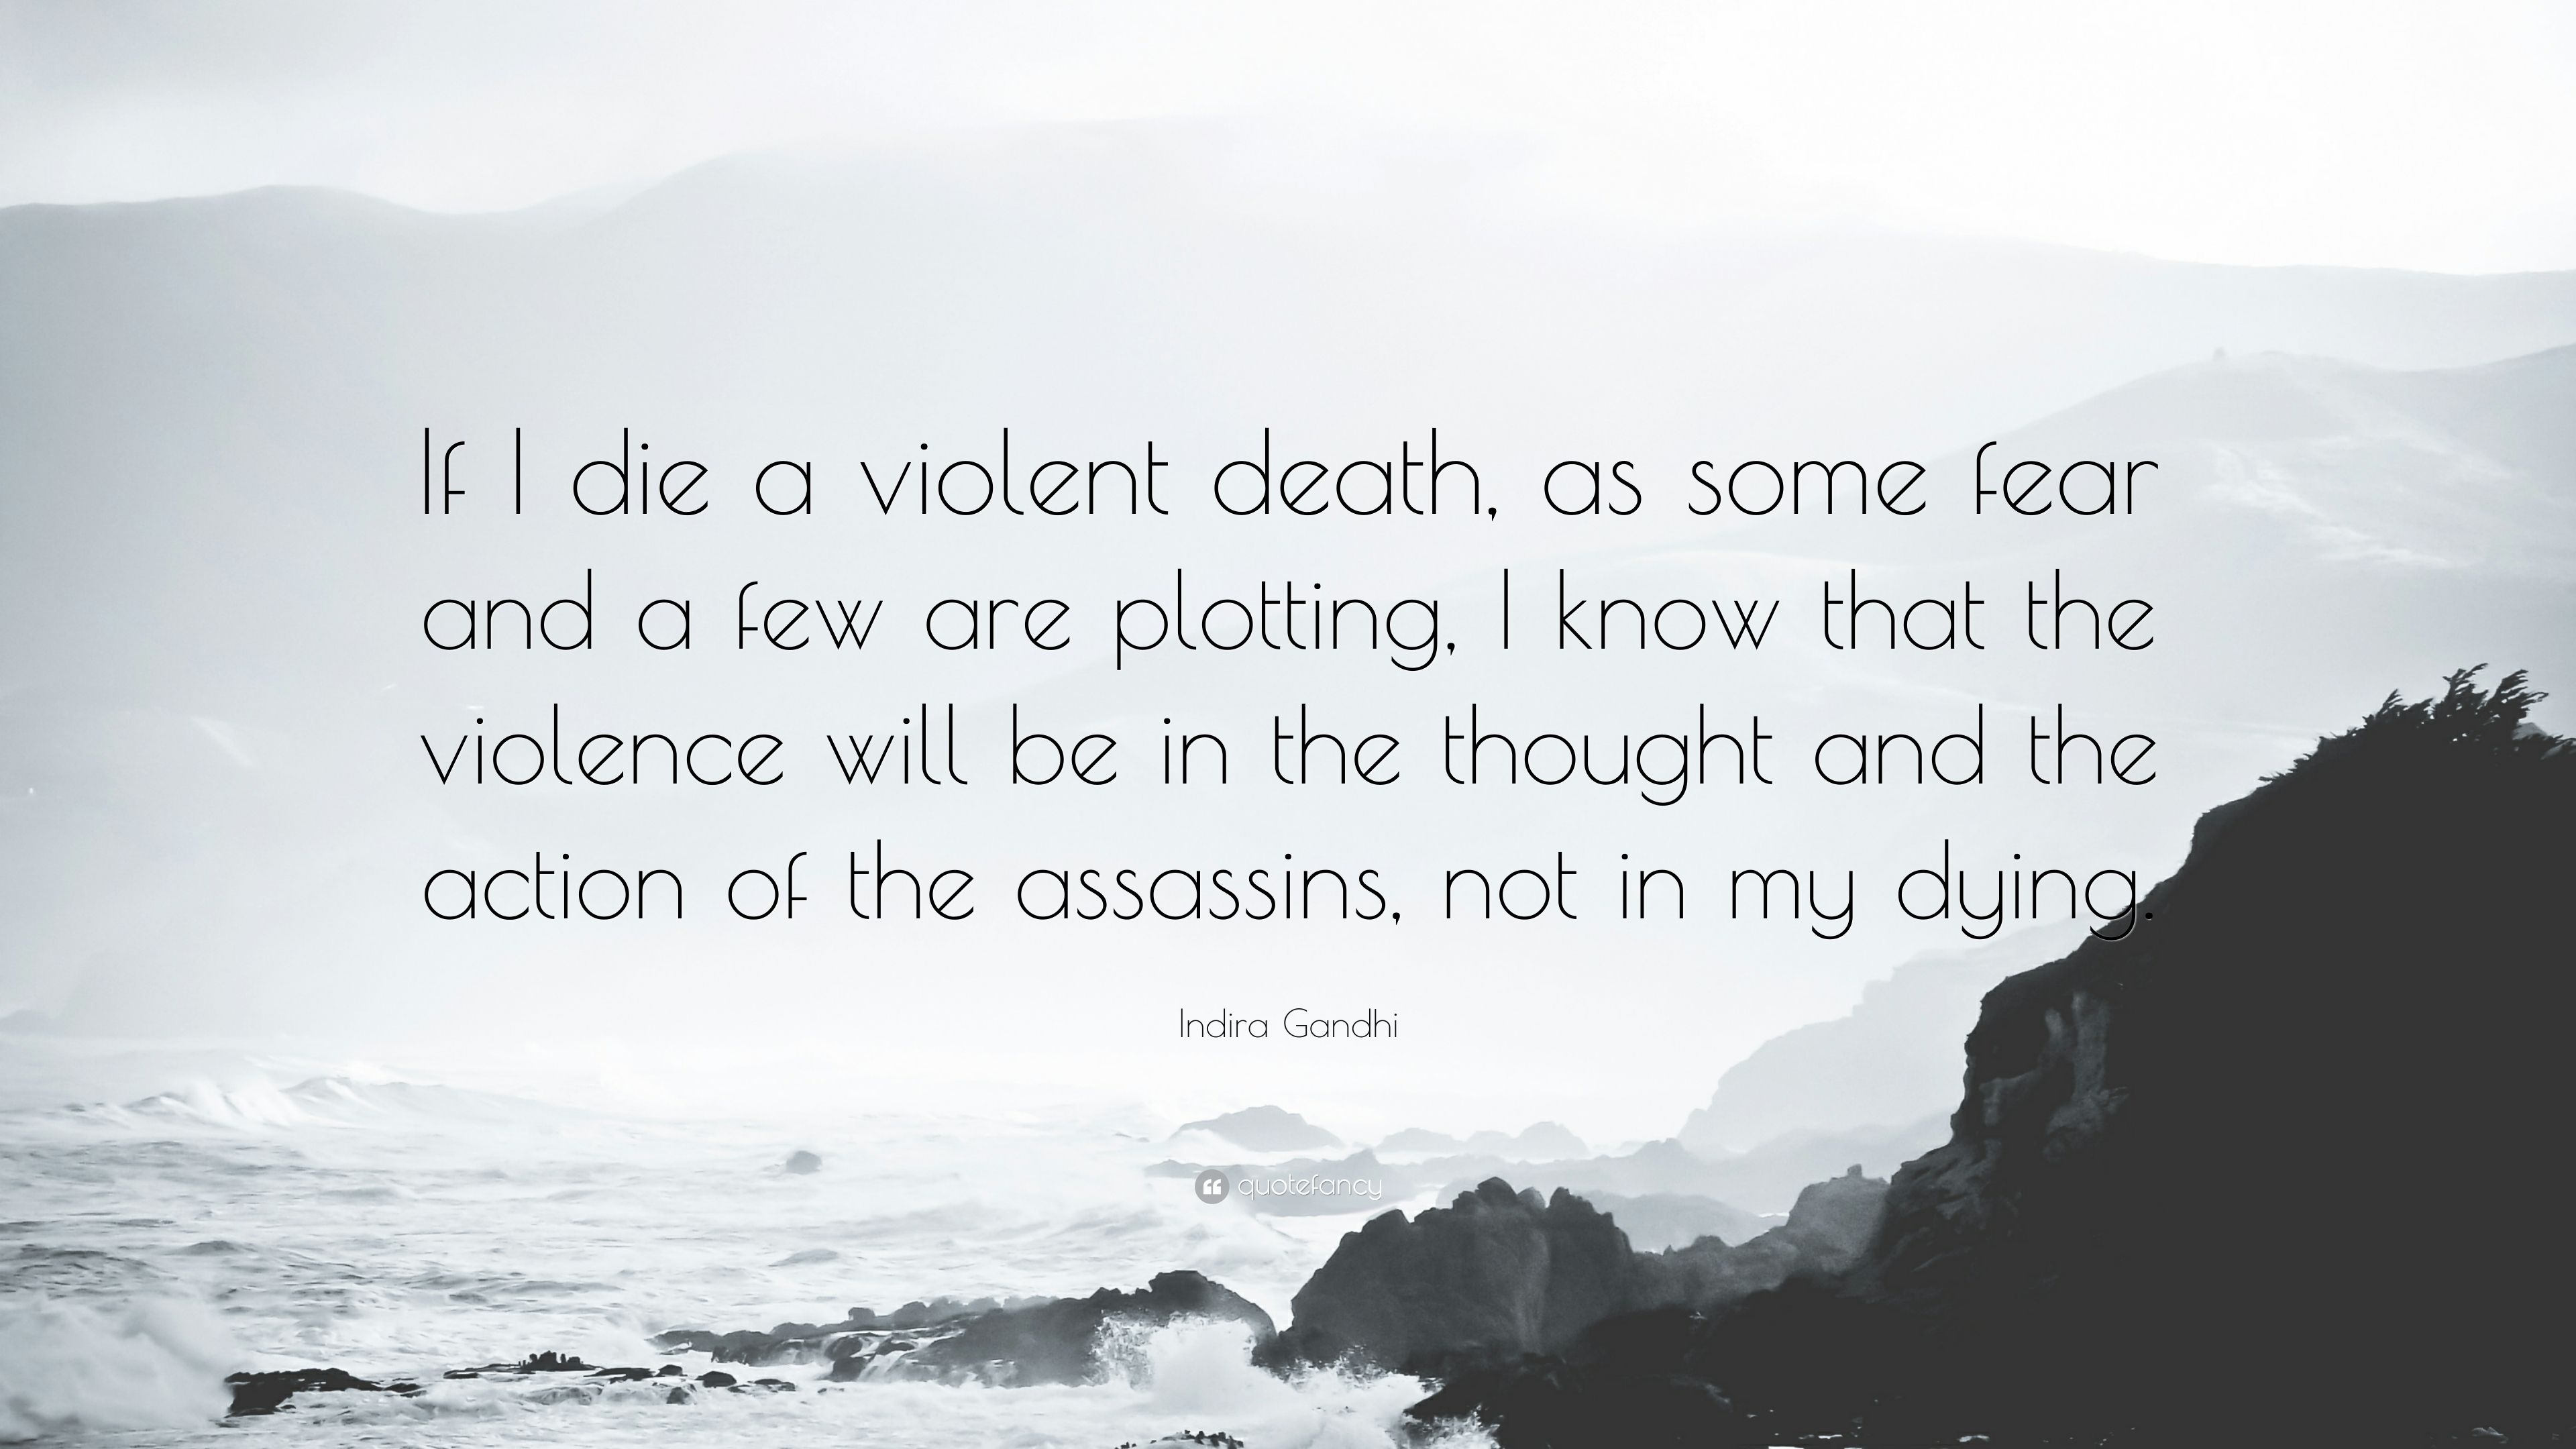 Indira Gandhi Quote: “If I die a violent death, as some fear and a